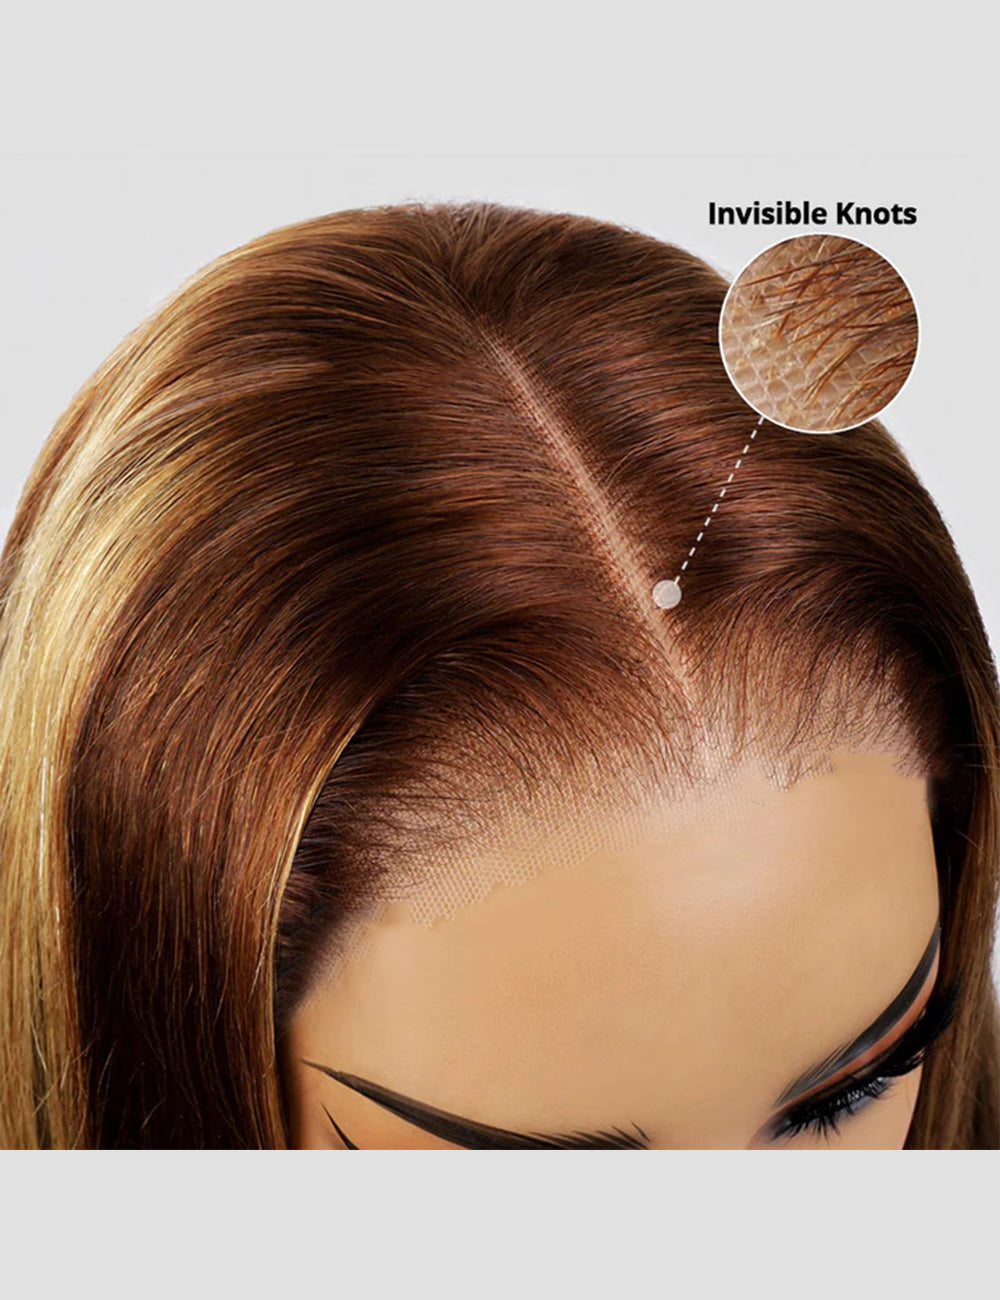 Invisible Knots Balayage Highlight Wigs Kinky Curly 13x6 Glueless Lace Front Wigs Pre Plucked Pre Cut Wigs